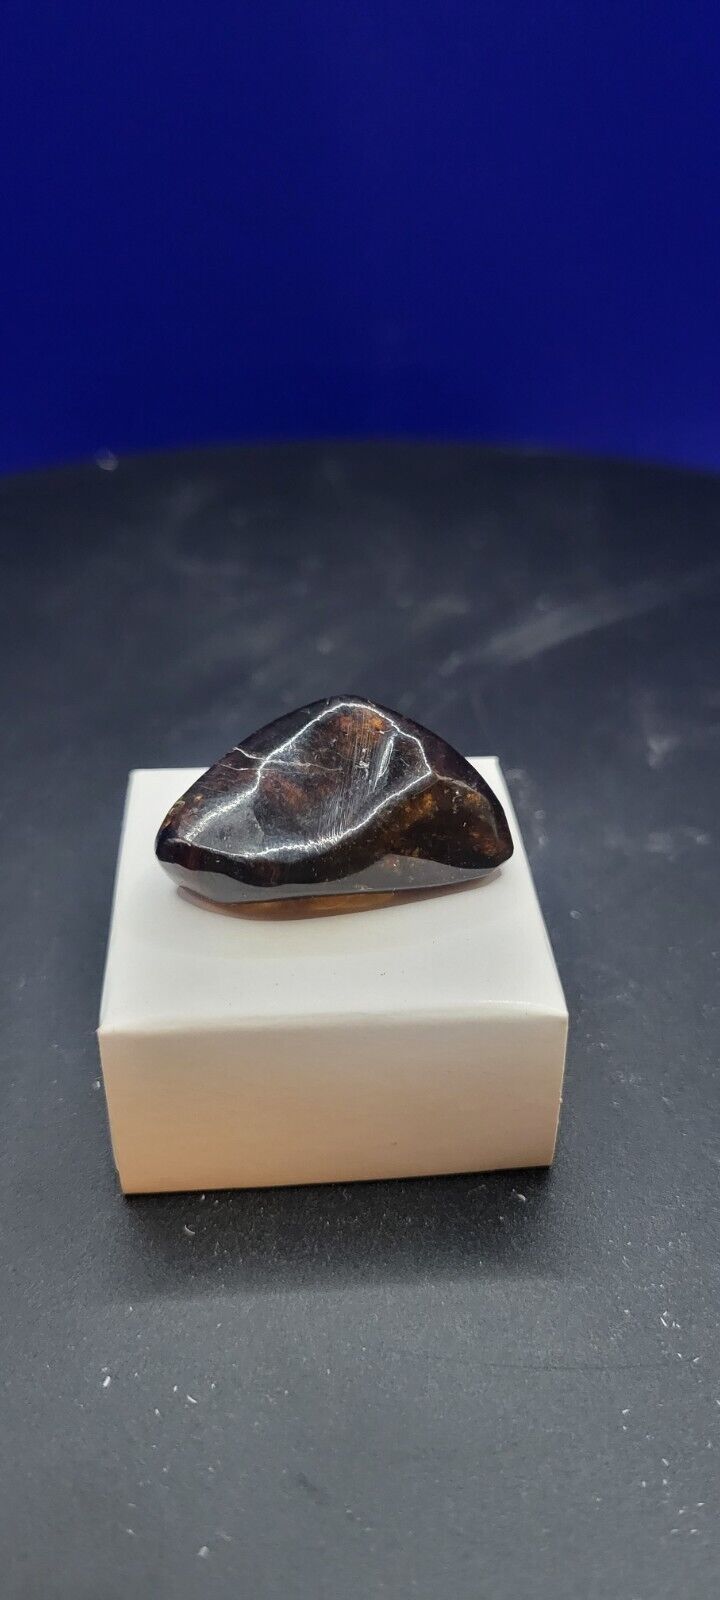 Genuine Fossil Amber from the Dominican Republic (REAL) (Jurassic Park Site)AF5